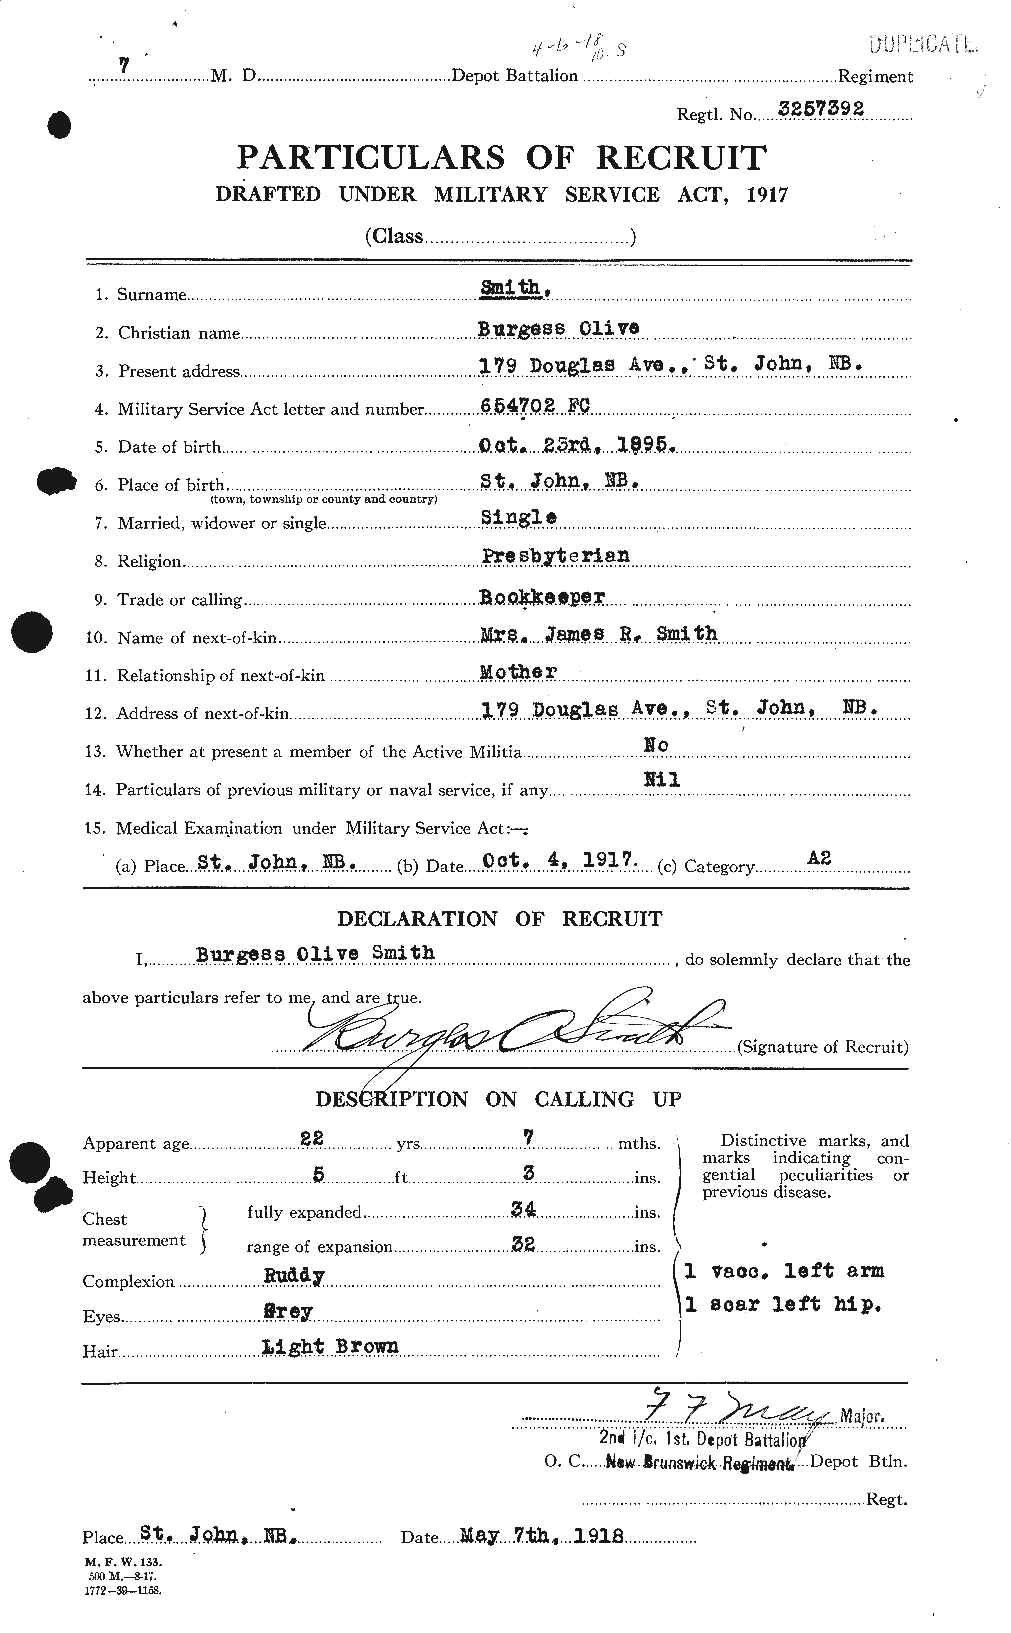 Personnel Records of the First World War - CEF 100825a